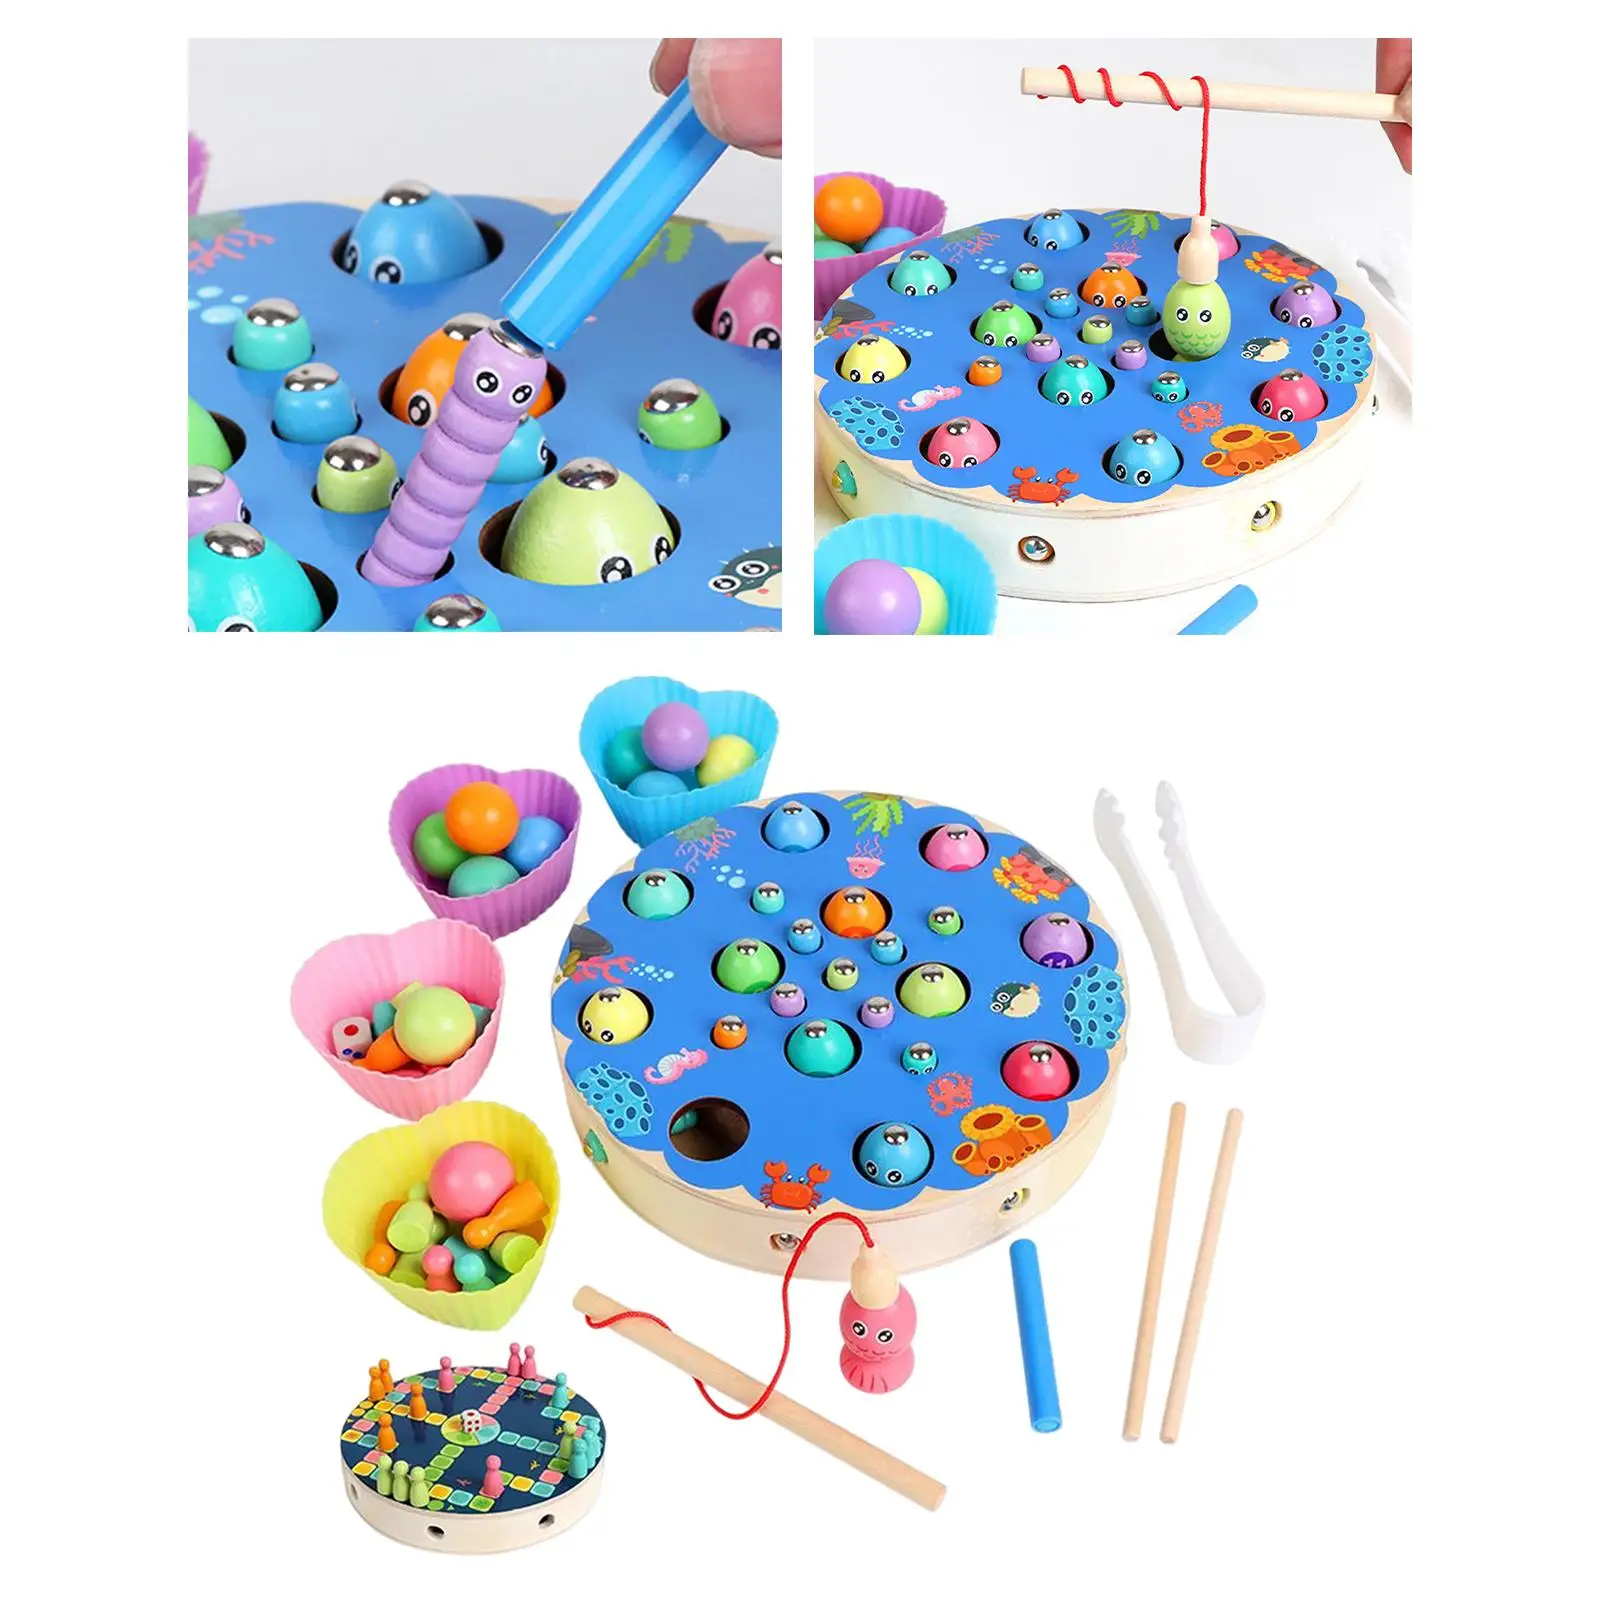 Wooden Fishing Game Fishing Pole Multicolor Chopsticks for Birthday Gift